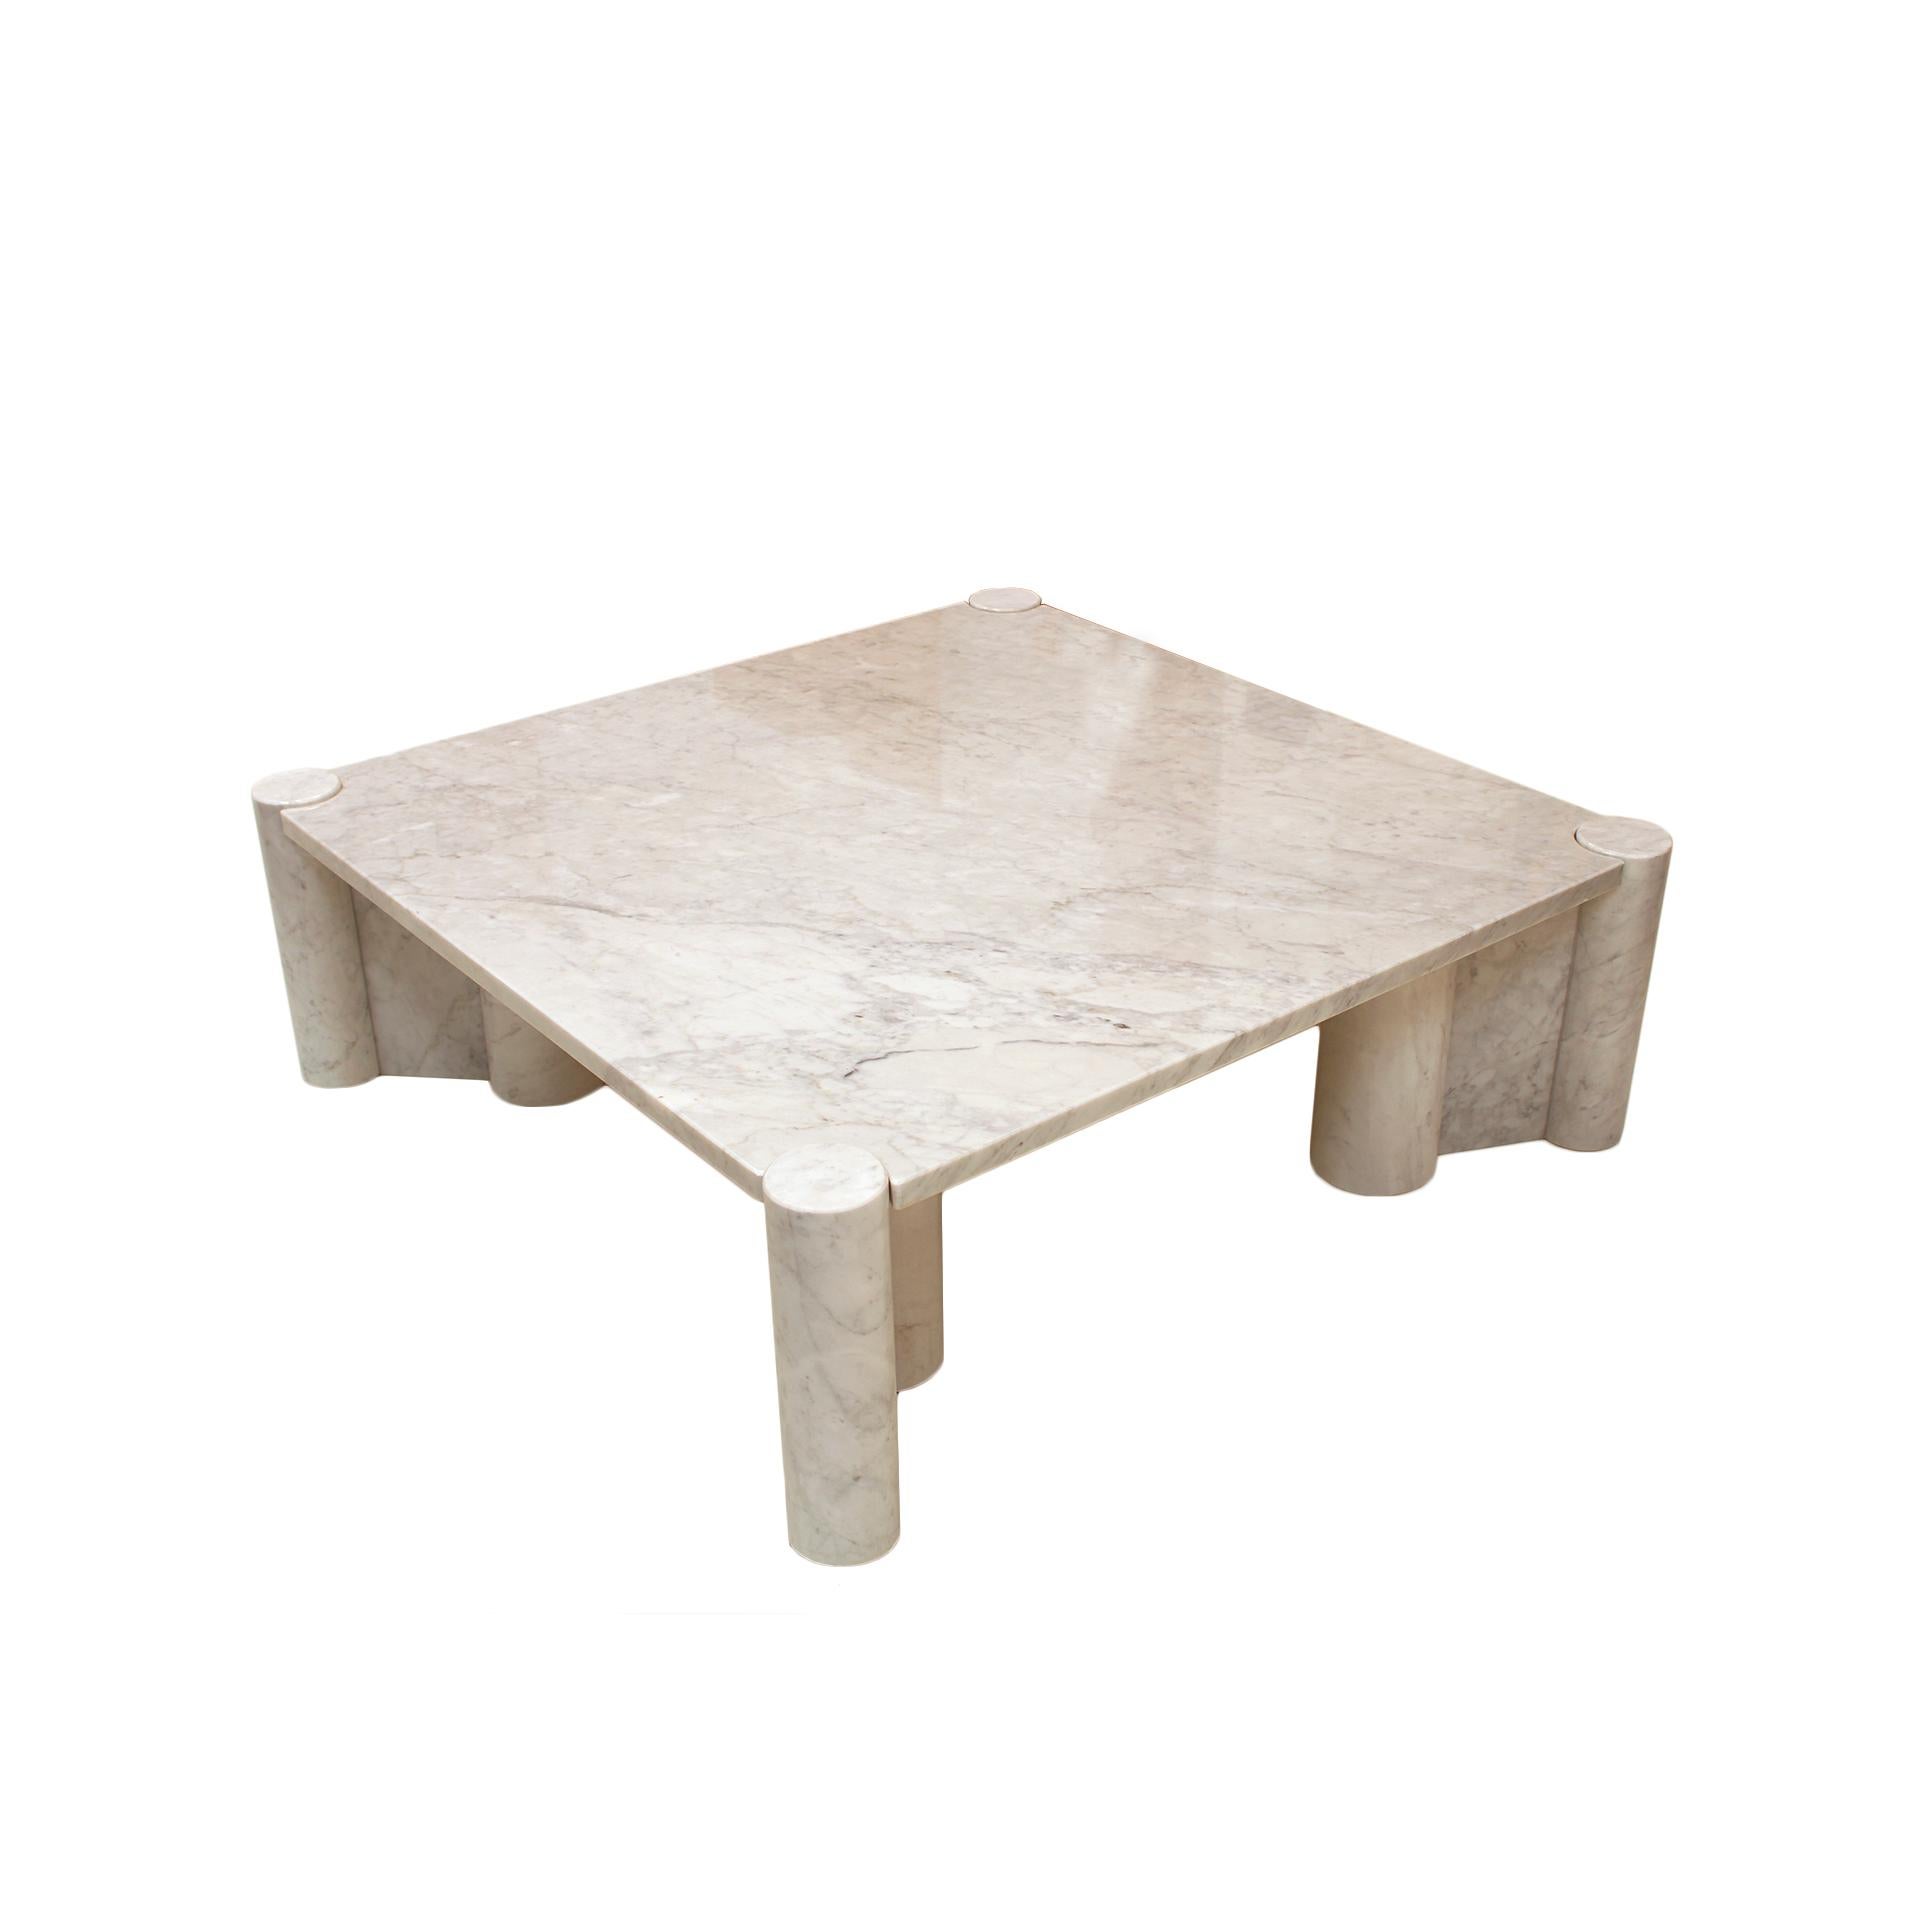 Mid-Century Modern Jumbo Carrara Marble Italian Square Coffee Table by Gae Aulenti For Knoll, 1960s For Sale